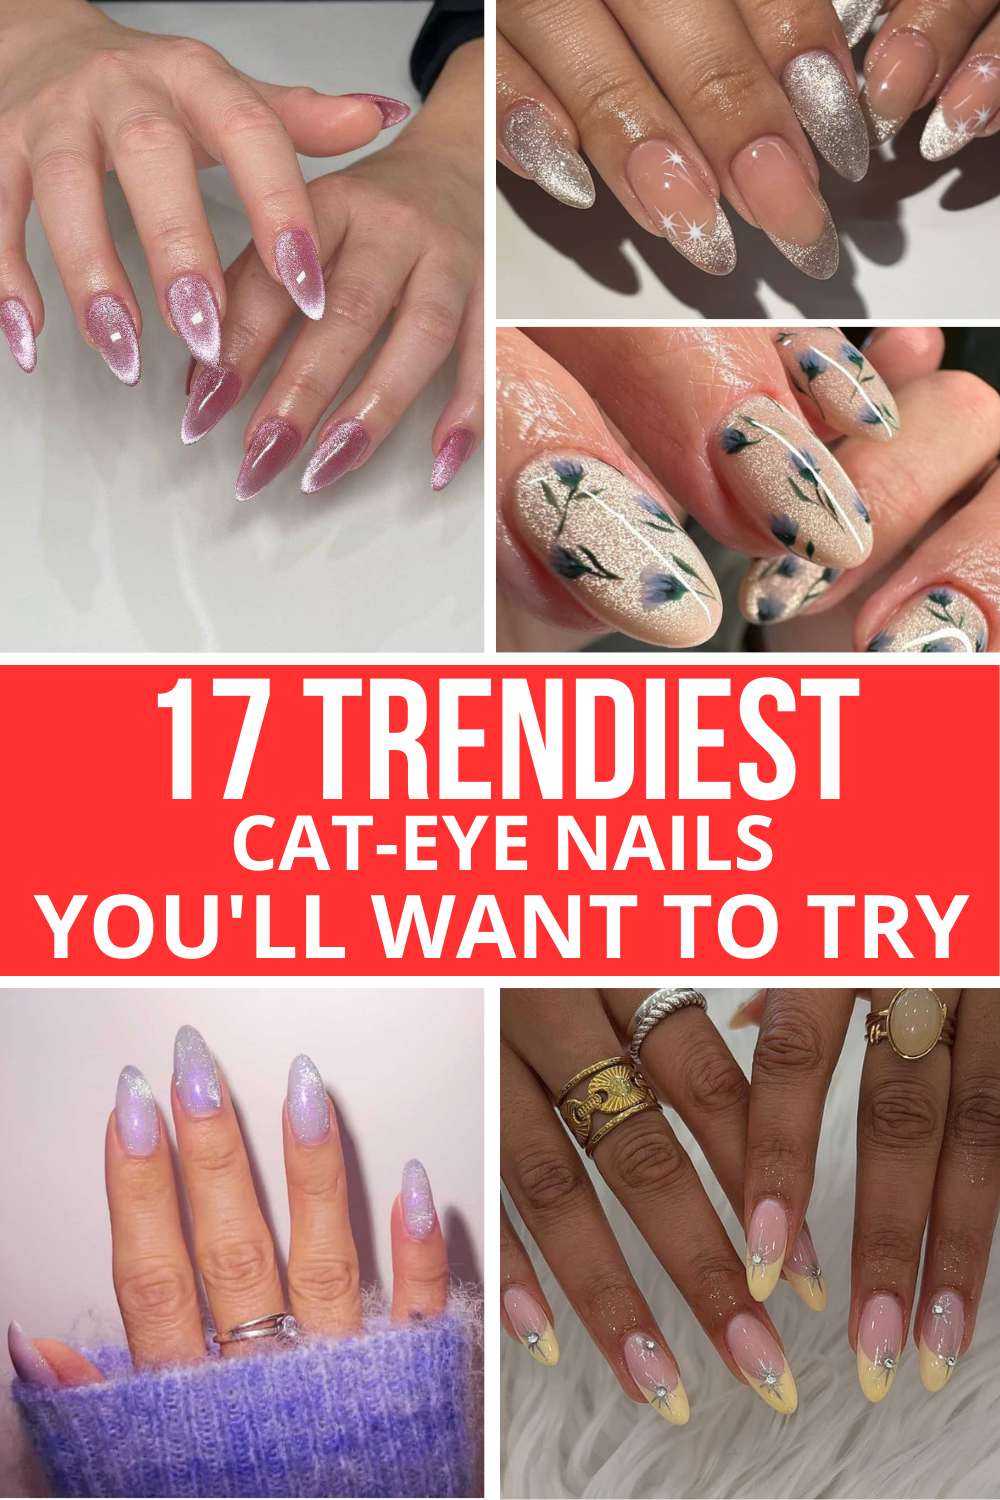 17 Trendiest Cat-Eye Nails You'll Want To Try